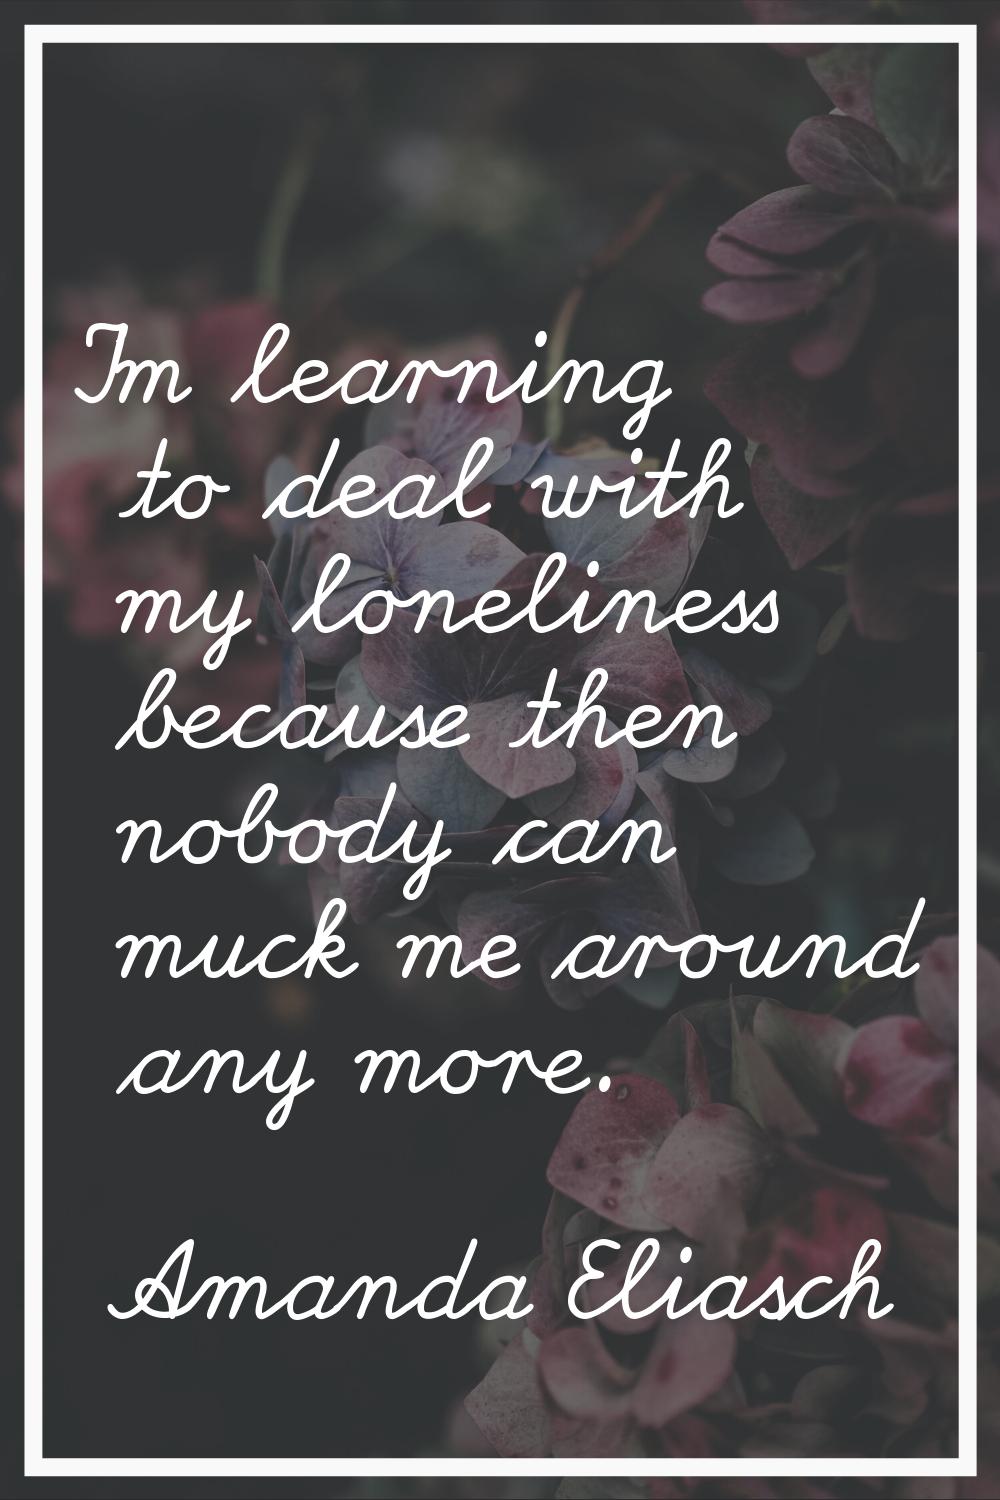 I'm learning to deal with my loneliness because then nobody can muck me around any more.